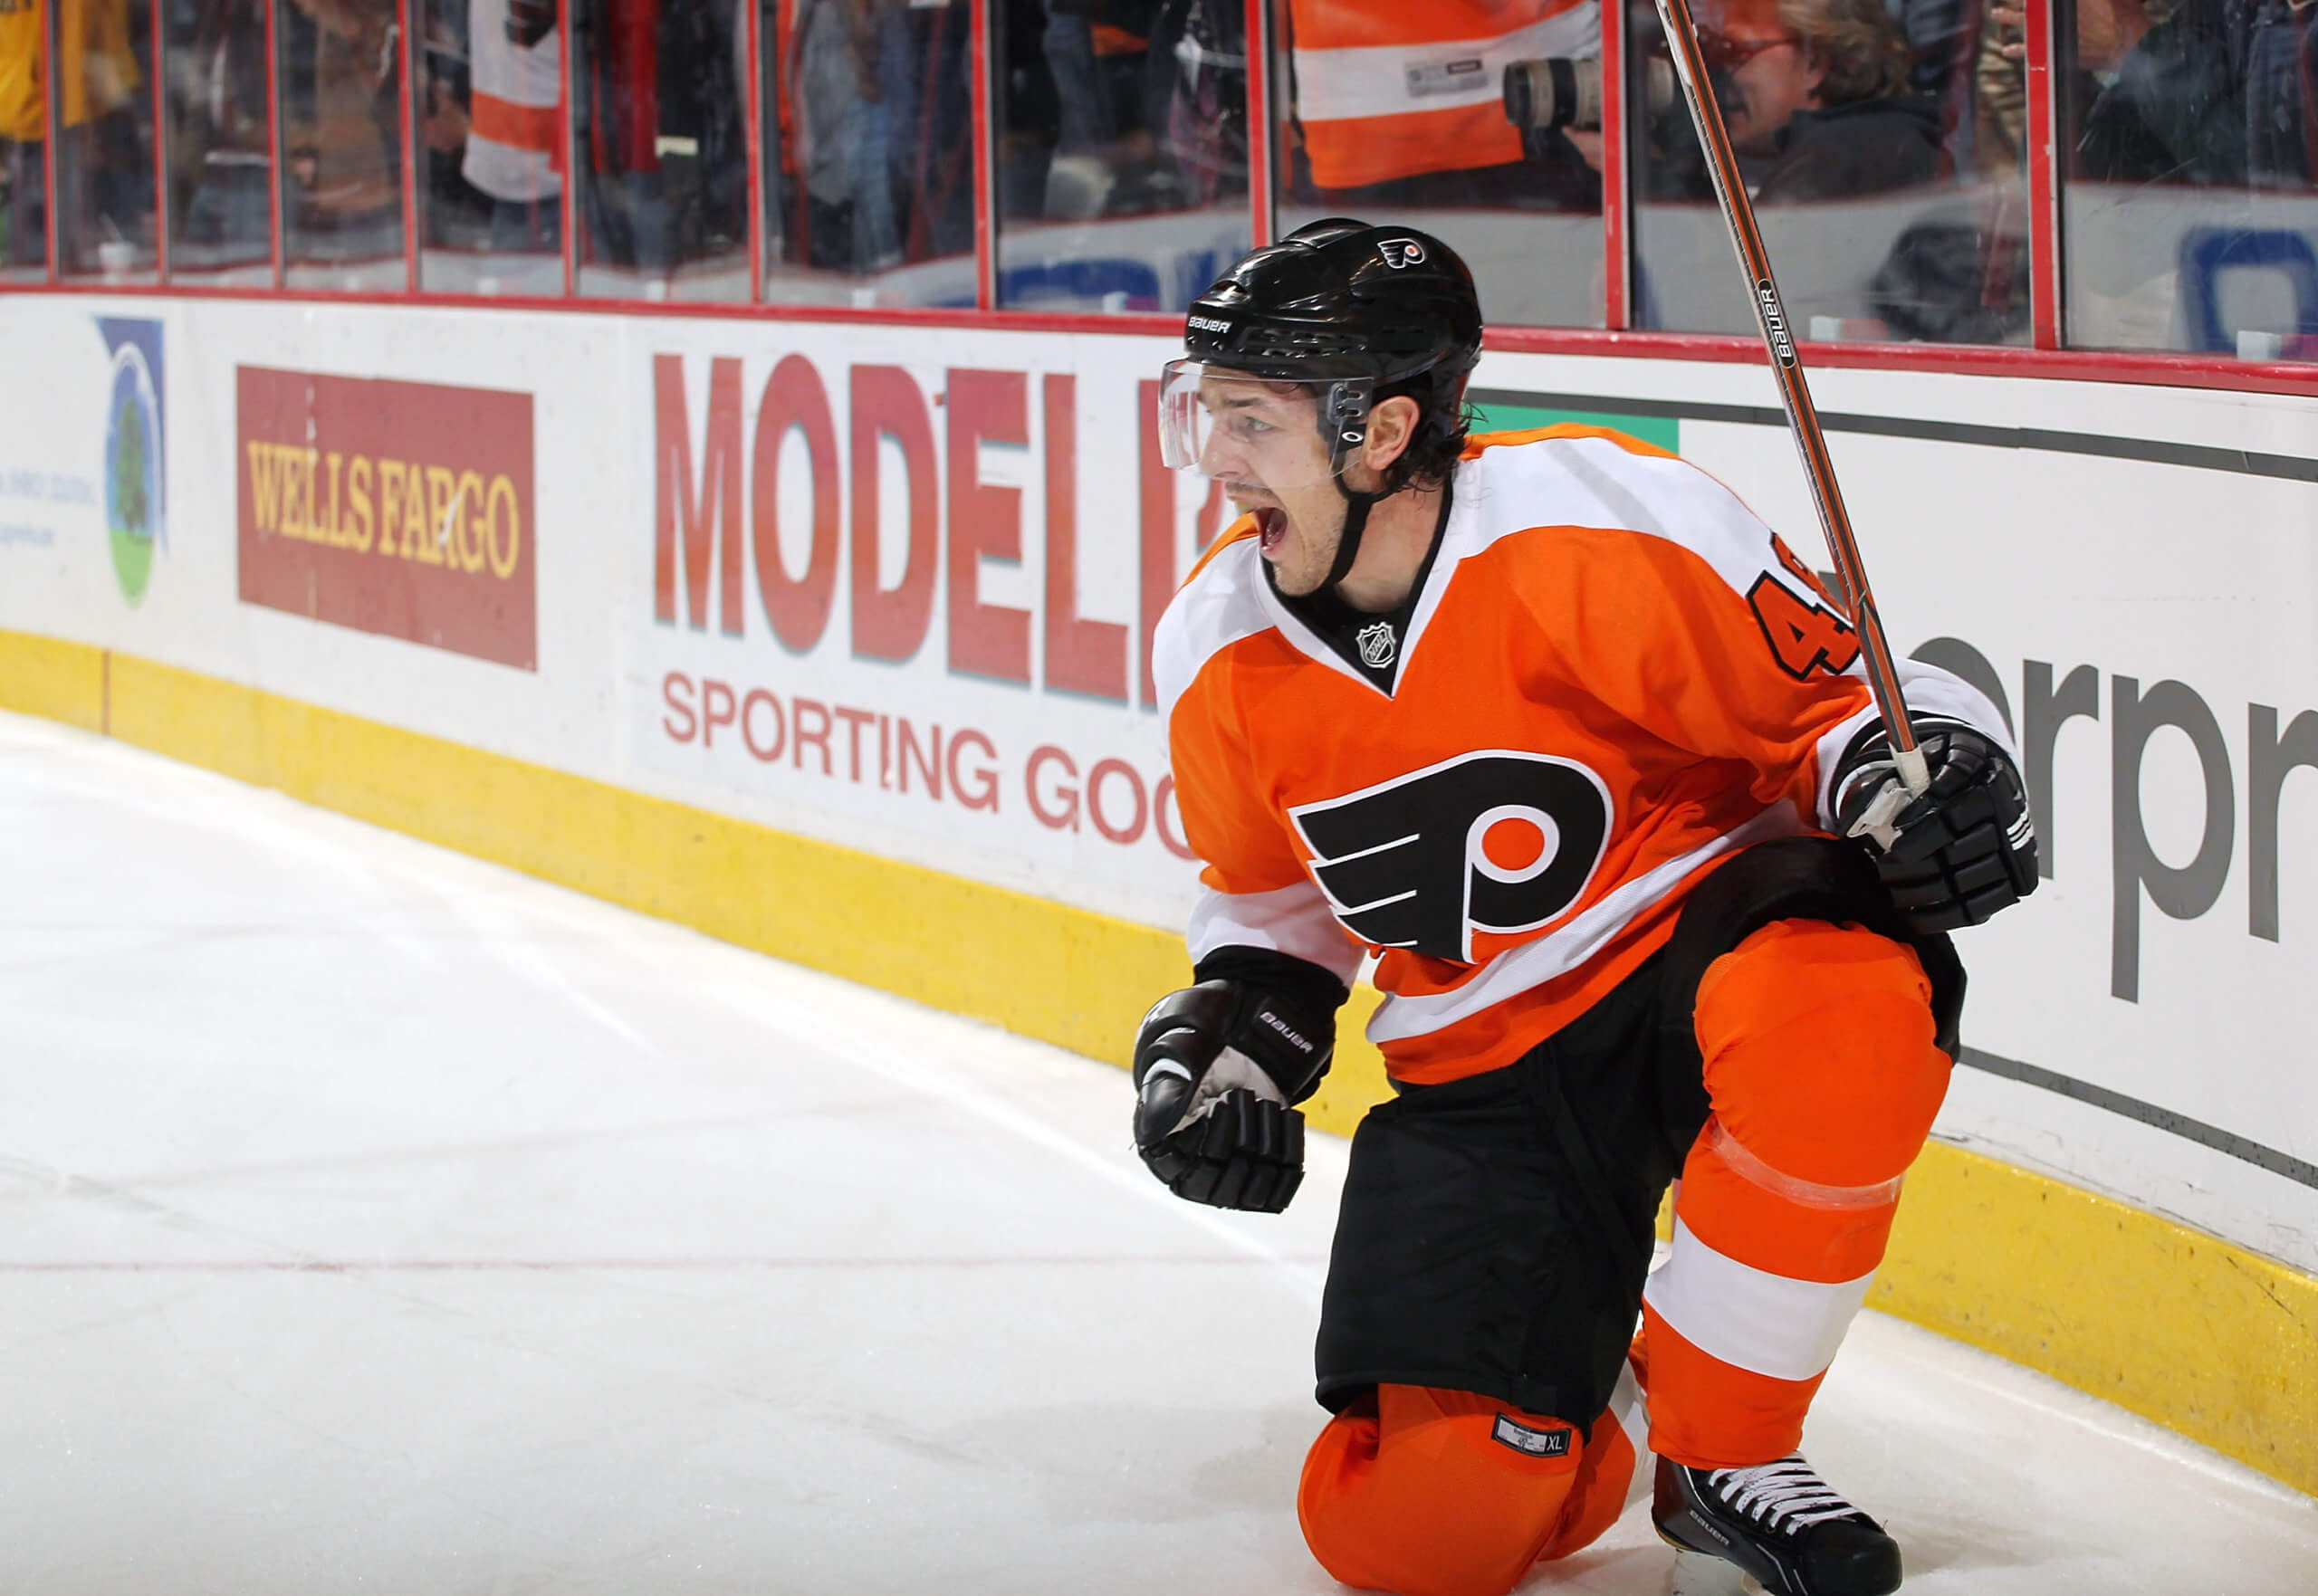 Danny Briere scores in OT to get the win for the Flyers.